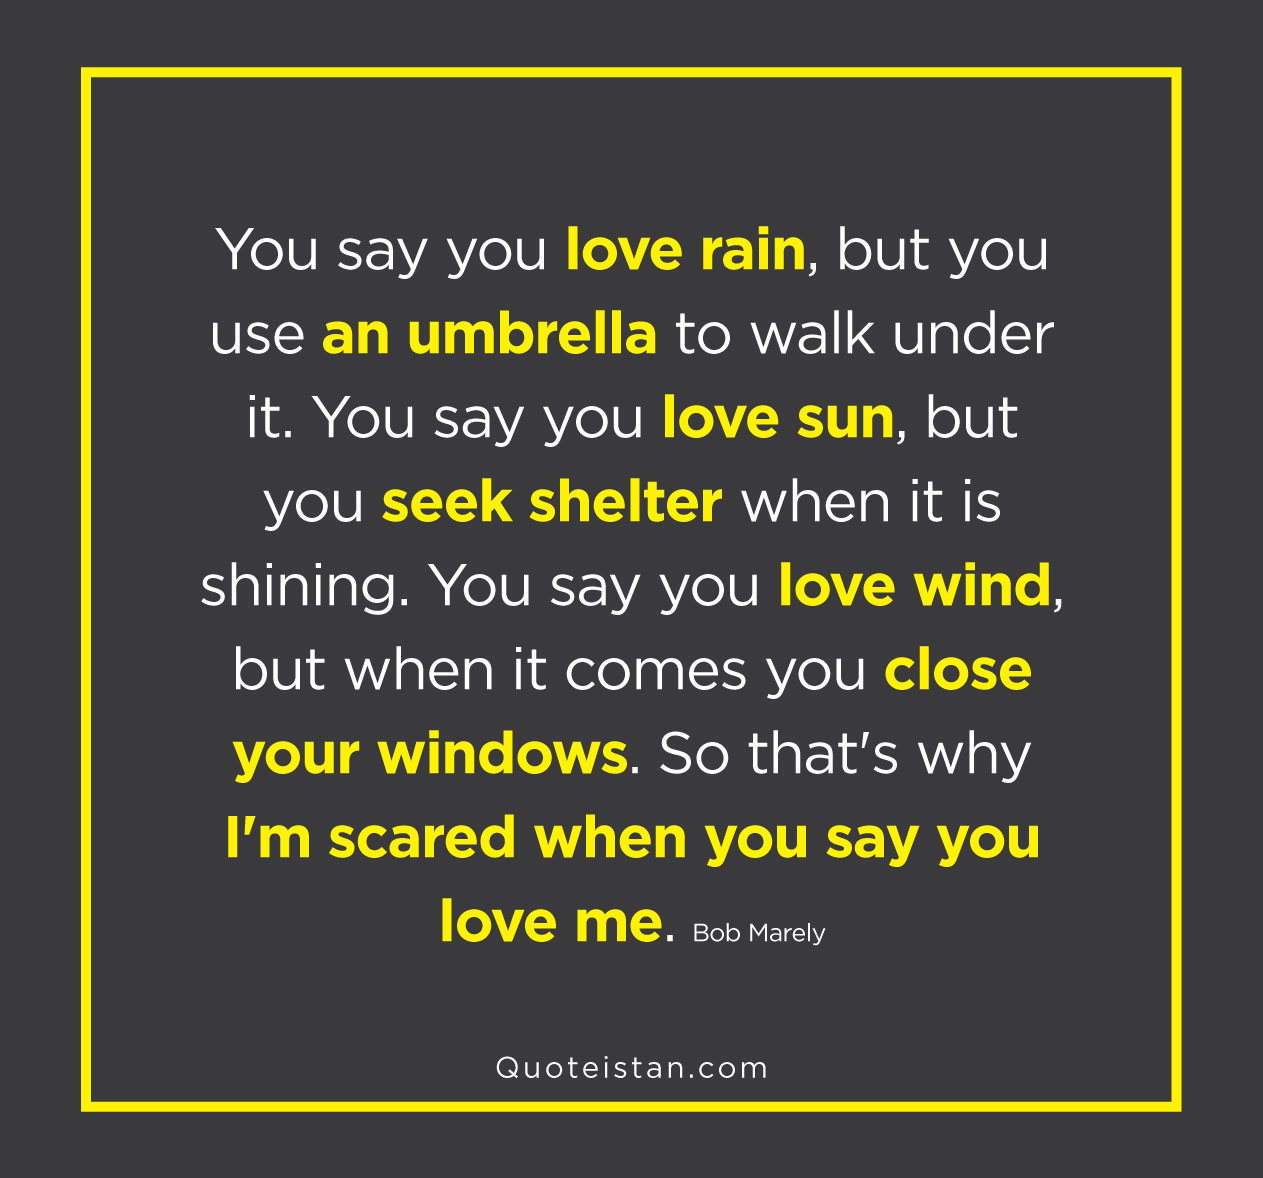 You say you love rain, but you use an umbrella to walk under it. You say you love sun, but you seek shelter when it is shining. You say you love wind, but when it comes you close your windows. So that's why I'm scared when you say you love me.